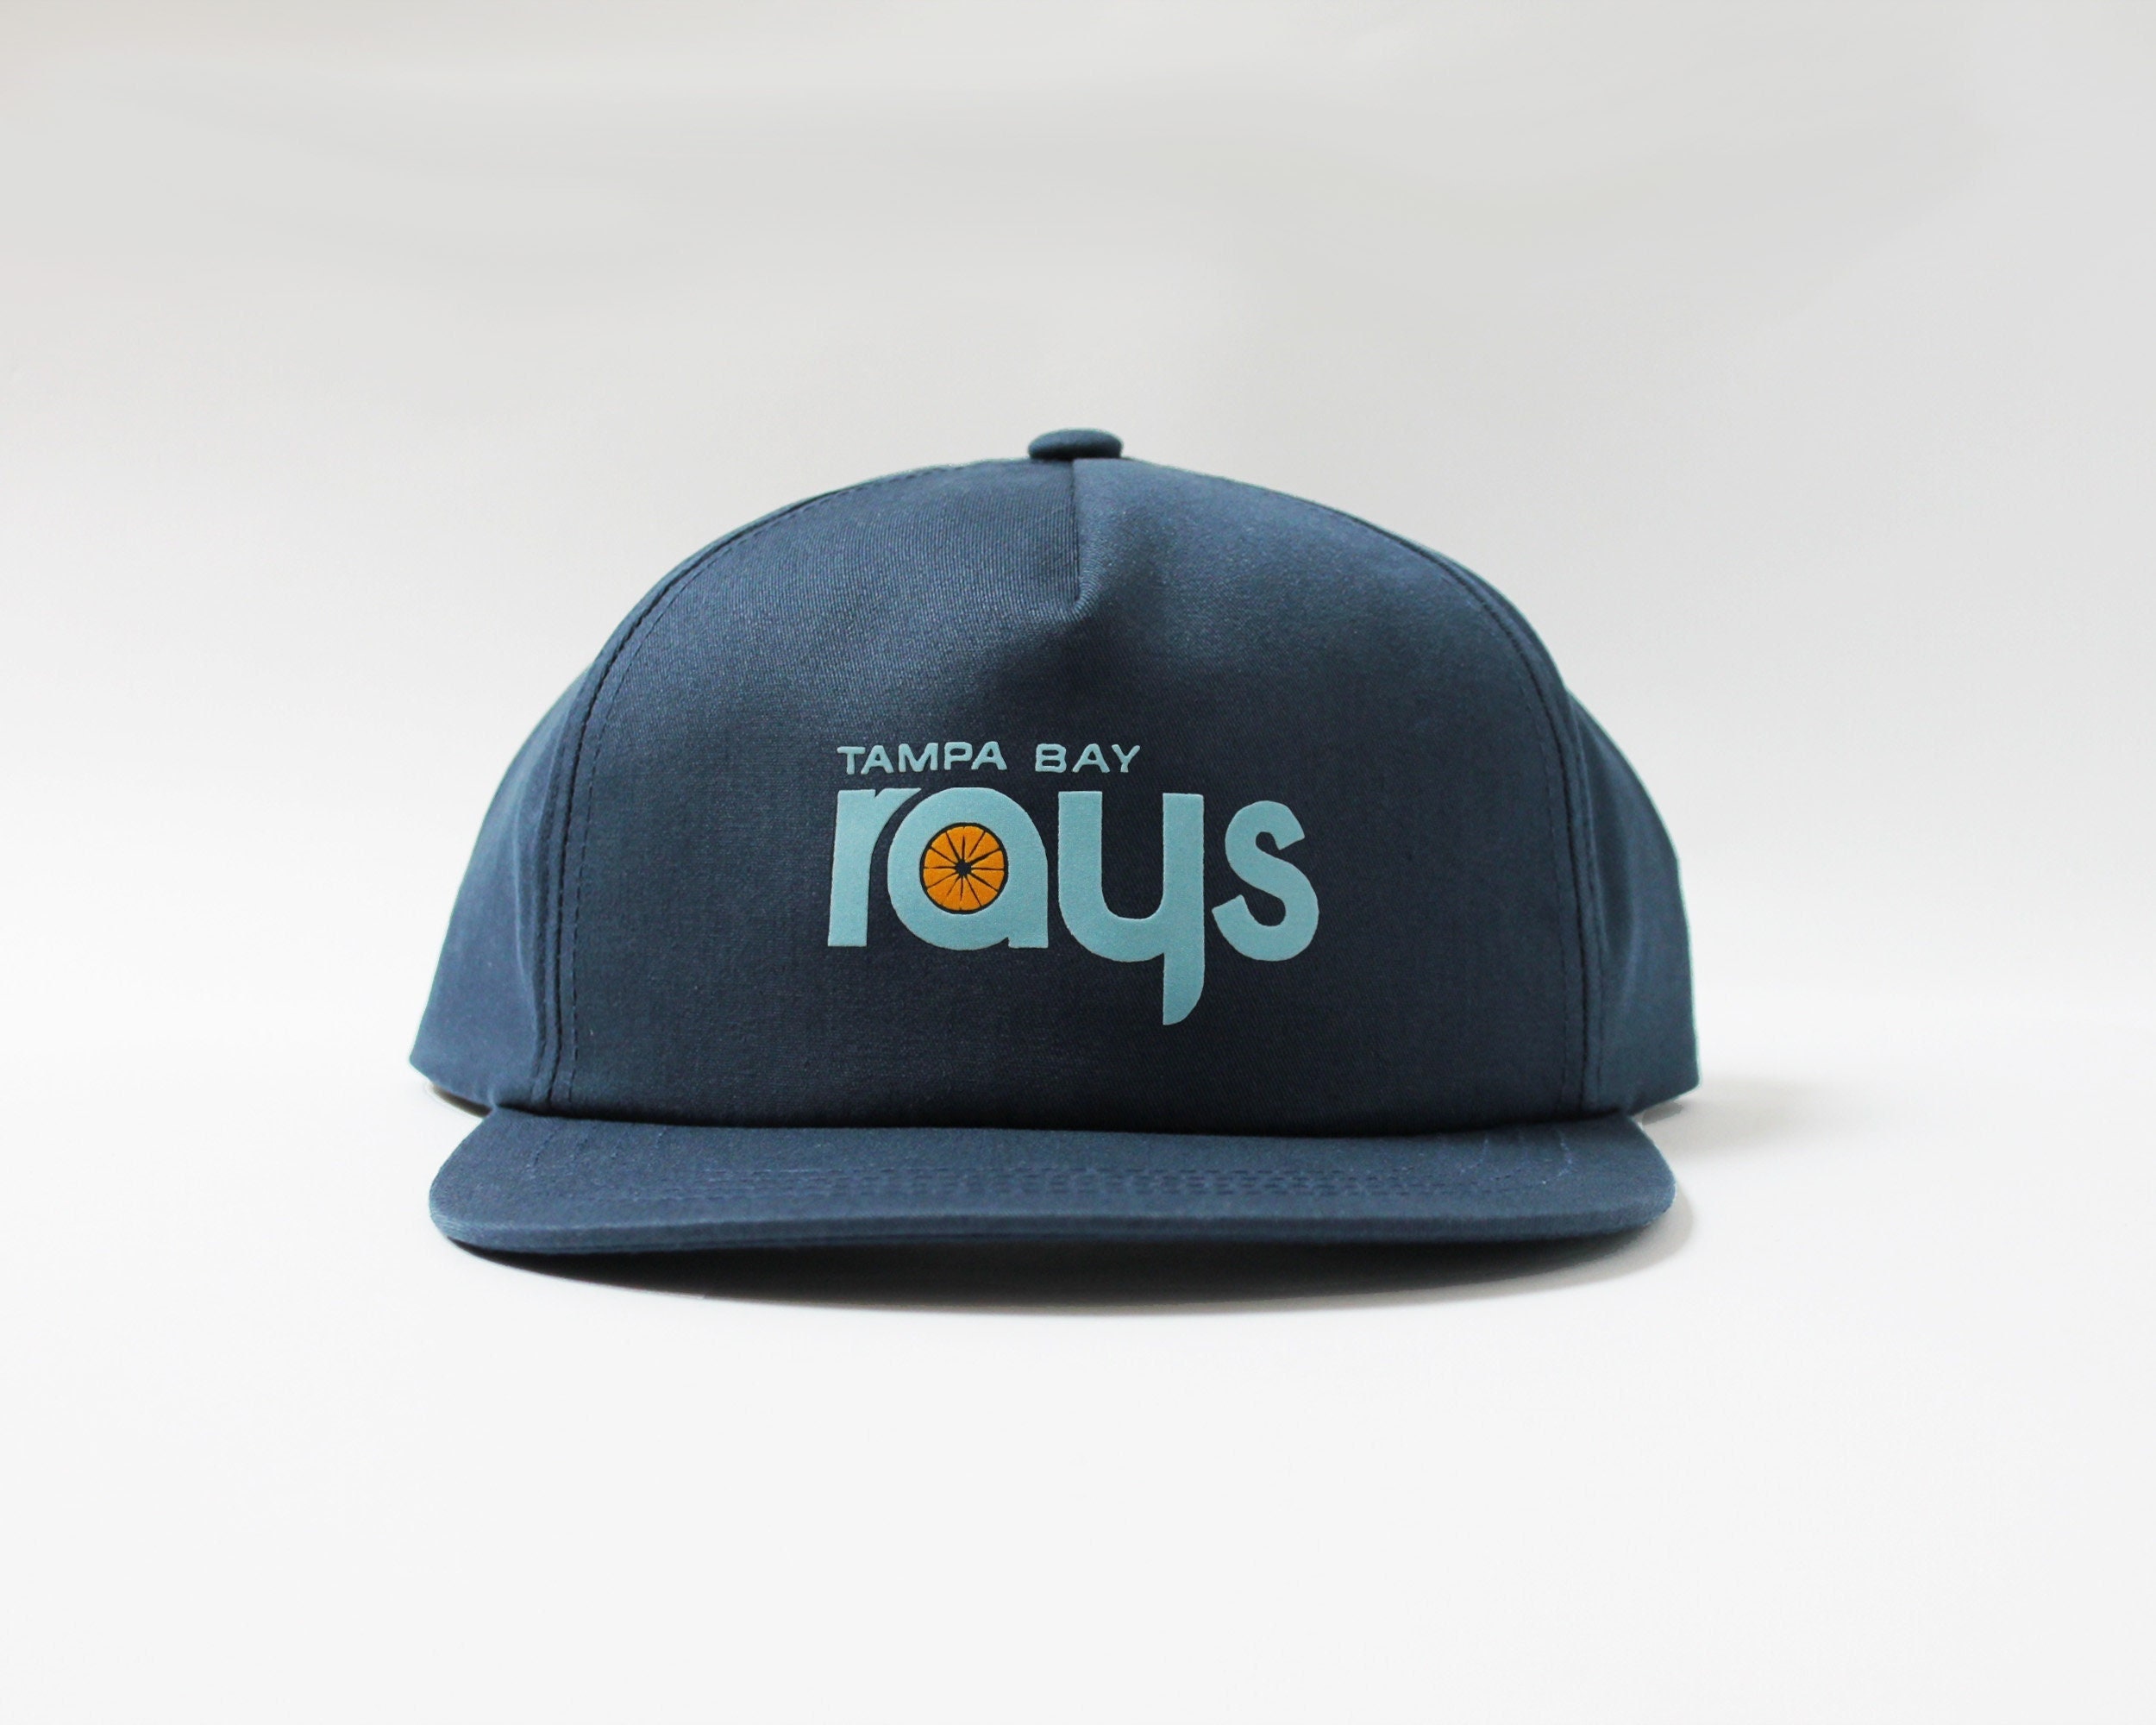 Tampa Bay Rays Hat | Vintage Style Rays Hat | Tampa Bay Rays Throwback Hat | Rays Hat Gift